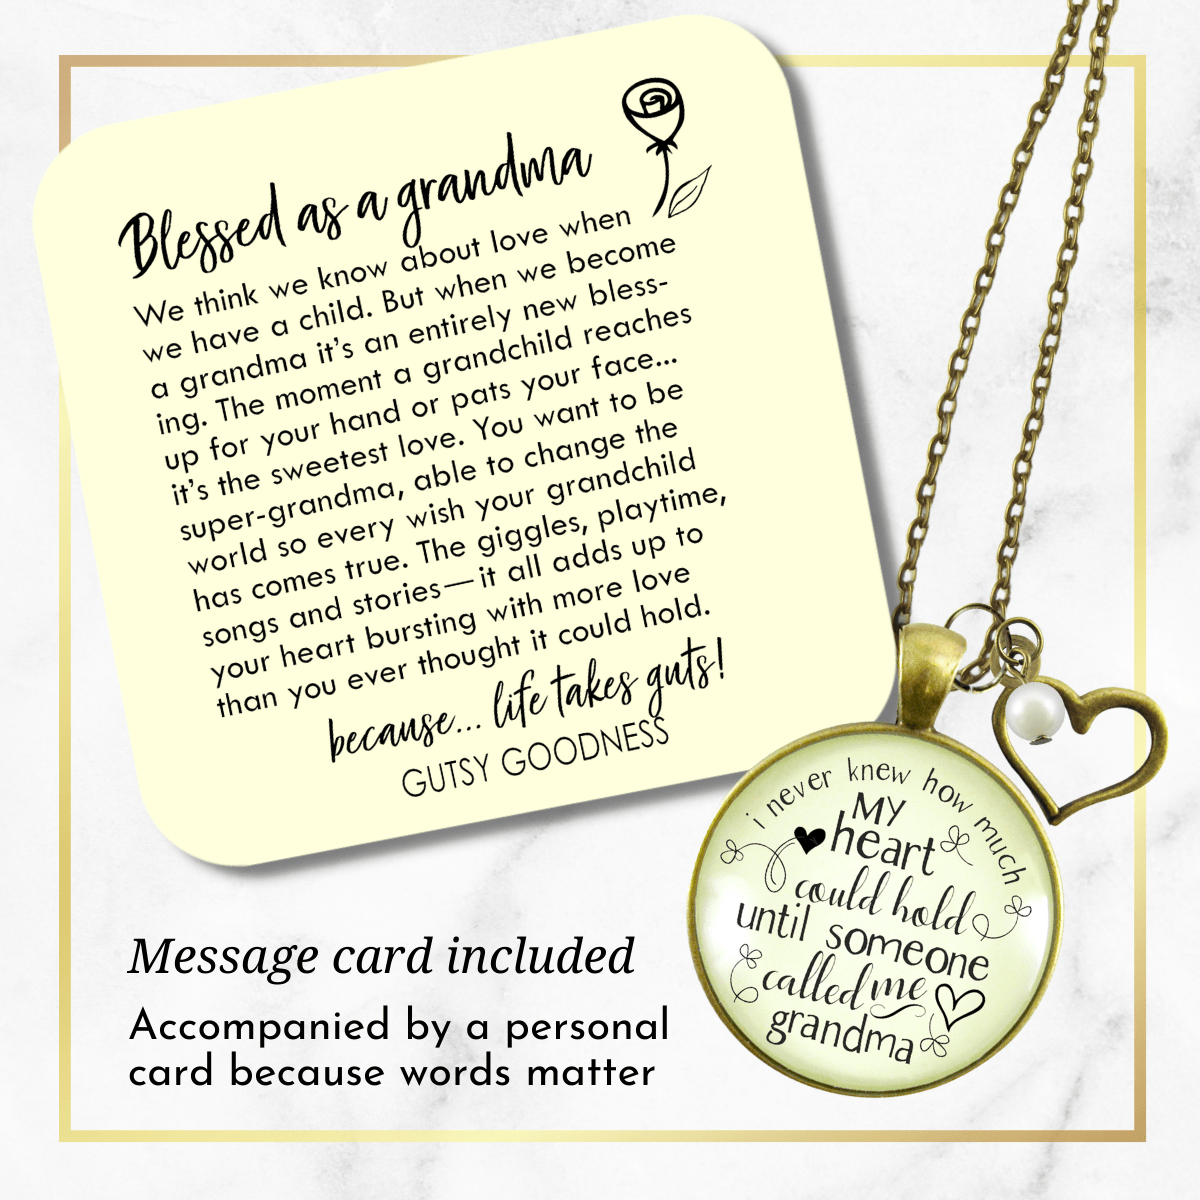 Gutsy Goodness New Grandma Necklace Never Knew Heart Hold Grandmother Jewelry Gift - Gutsy Goodness Handmade Jewelry;New Grandma Necklace Never Knew Heart Hold Grandmother Jewelry Gift - Gutsy Goodness Handmade Jewelry Gifts